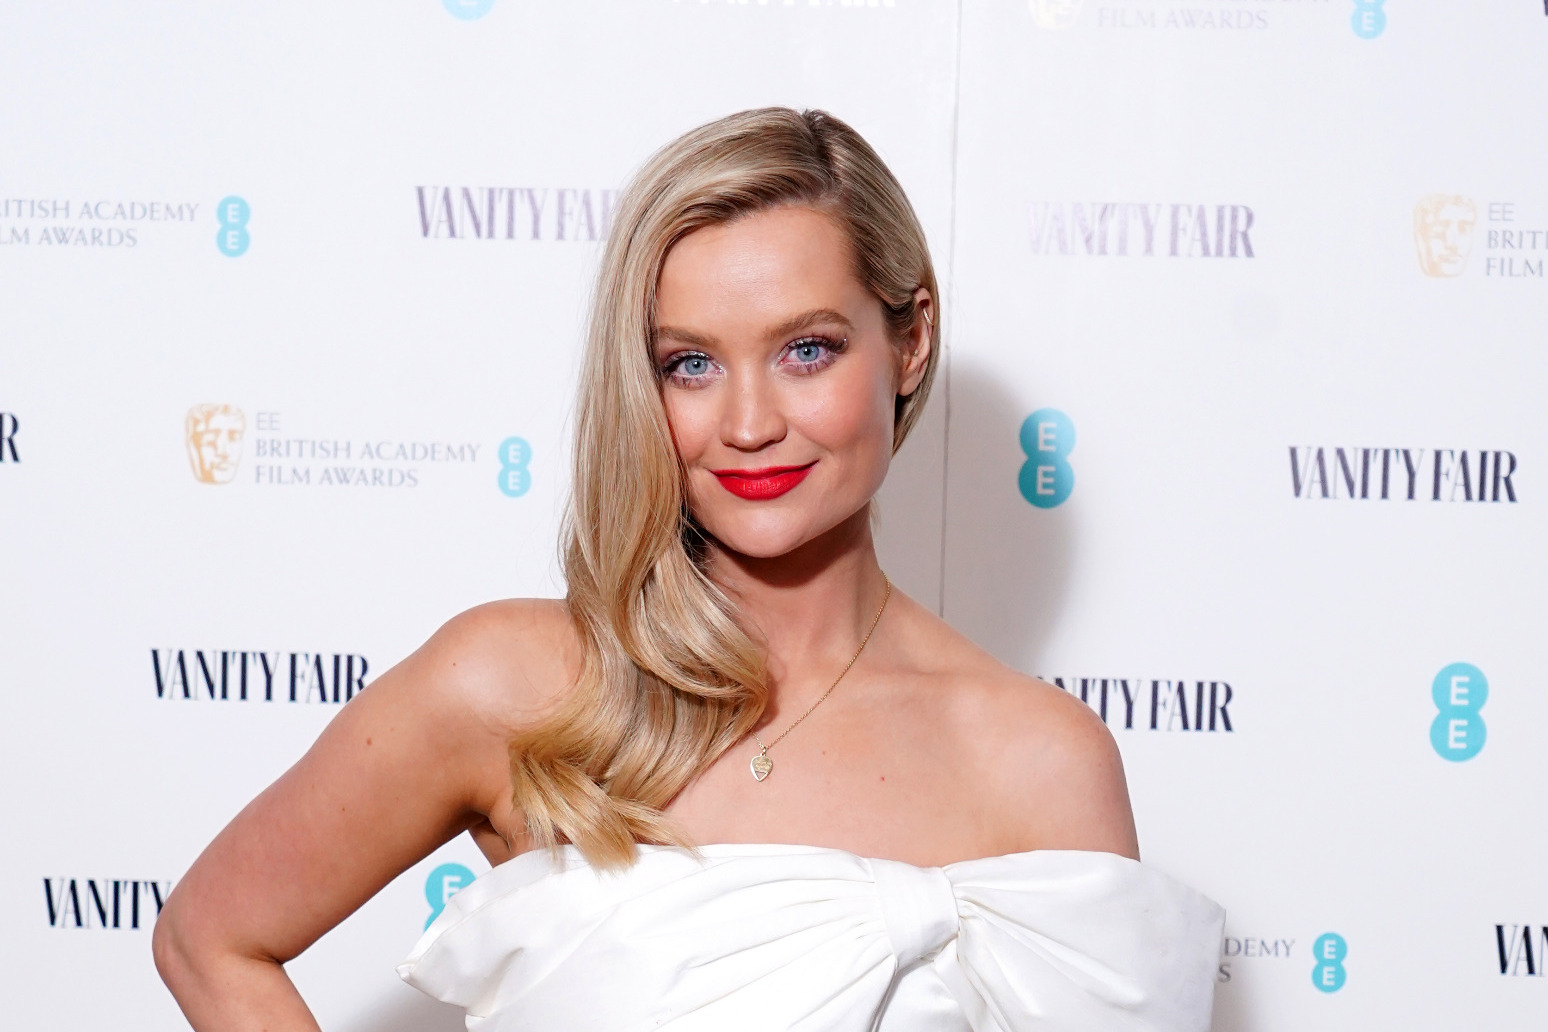 Laura Whitmore to is step down from her role as host of ITV’s Love Island 